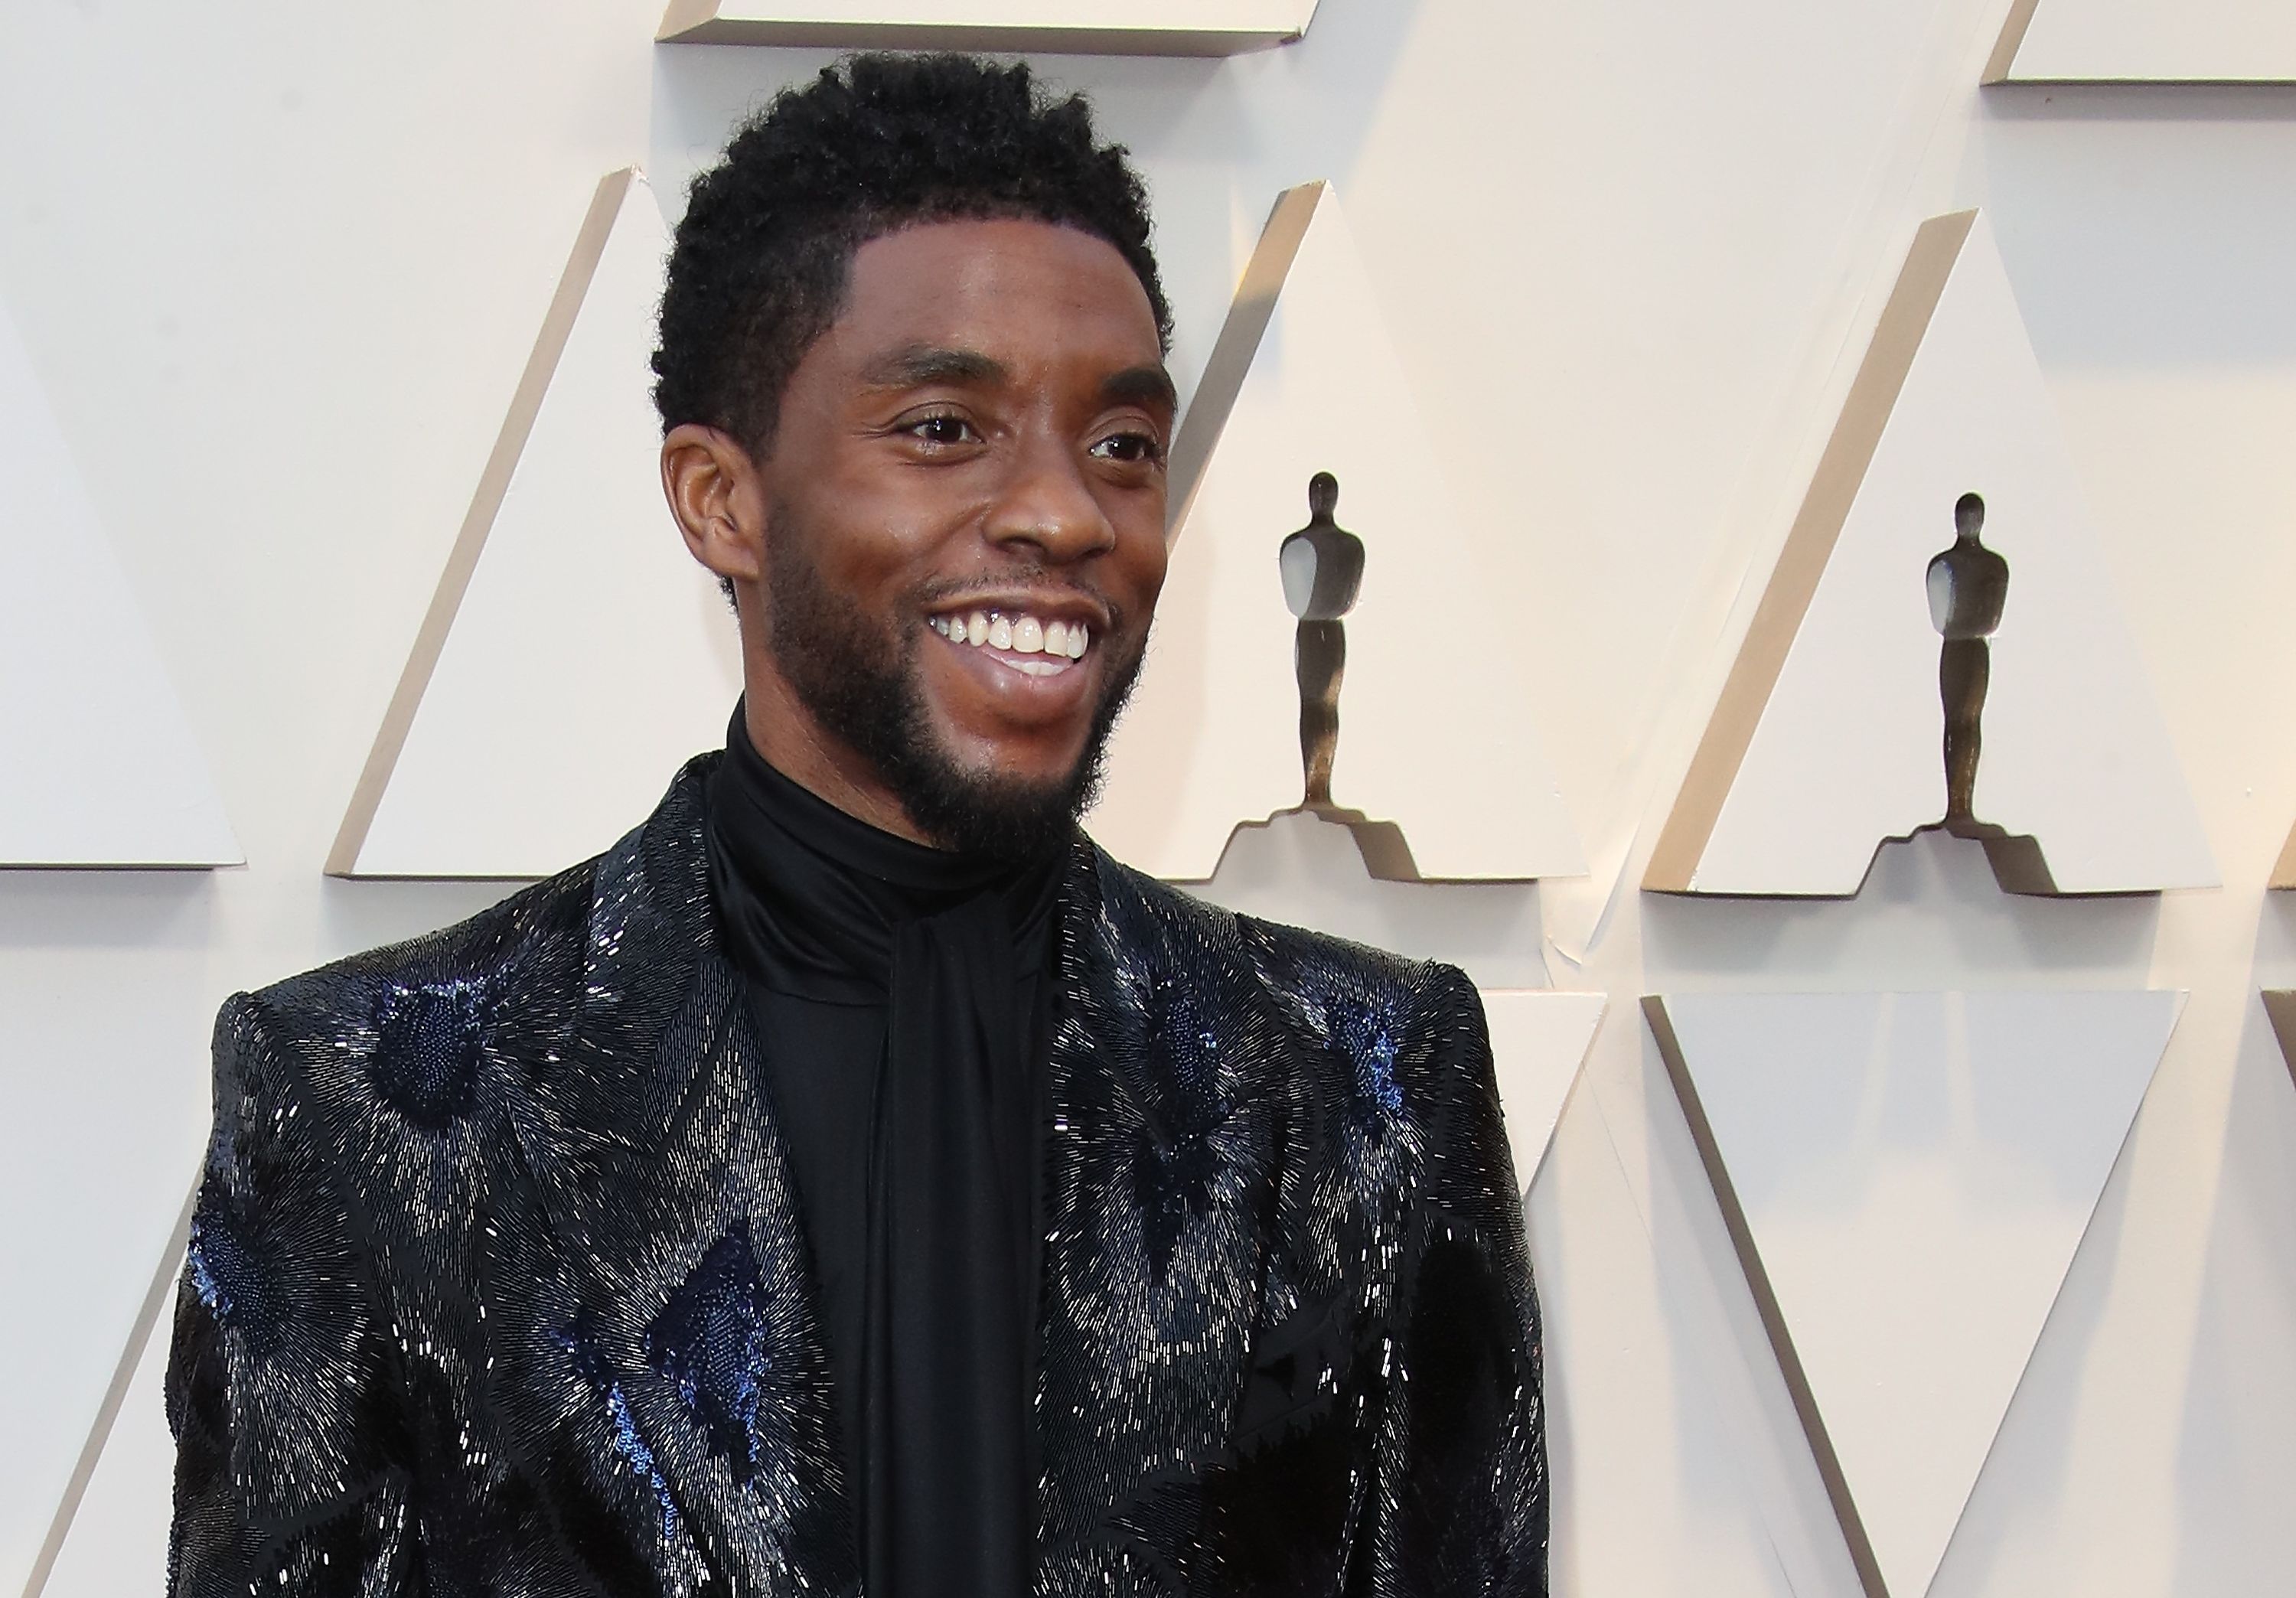 Chadwick Boseman at the 91st Annual Academy Awards at Hollywood and Highland on February 24 2019 in Hollywood, California | Photo: Getty Images